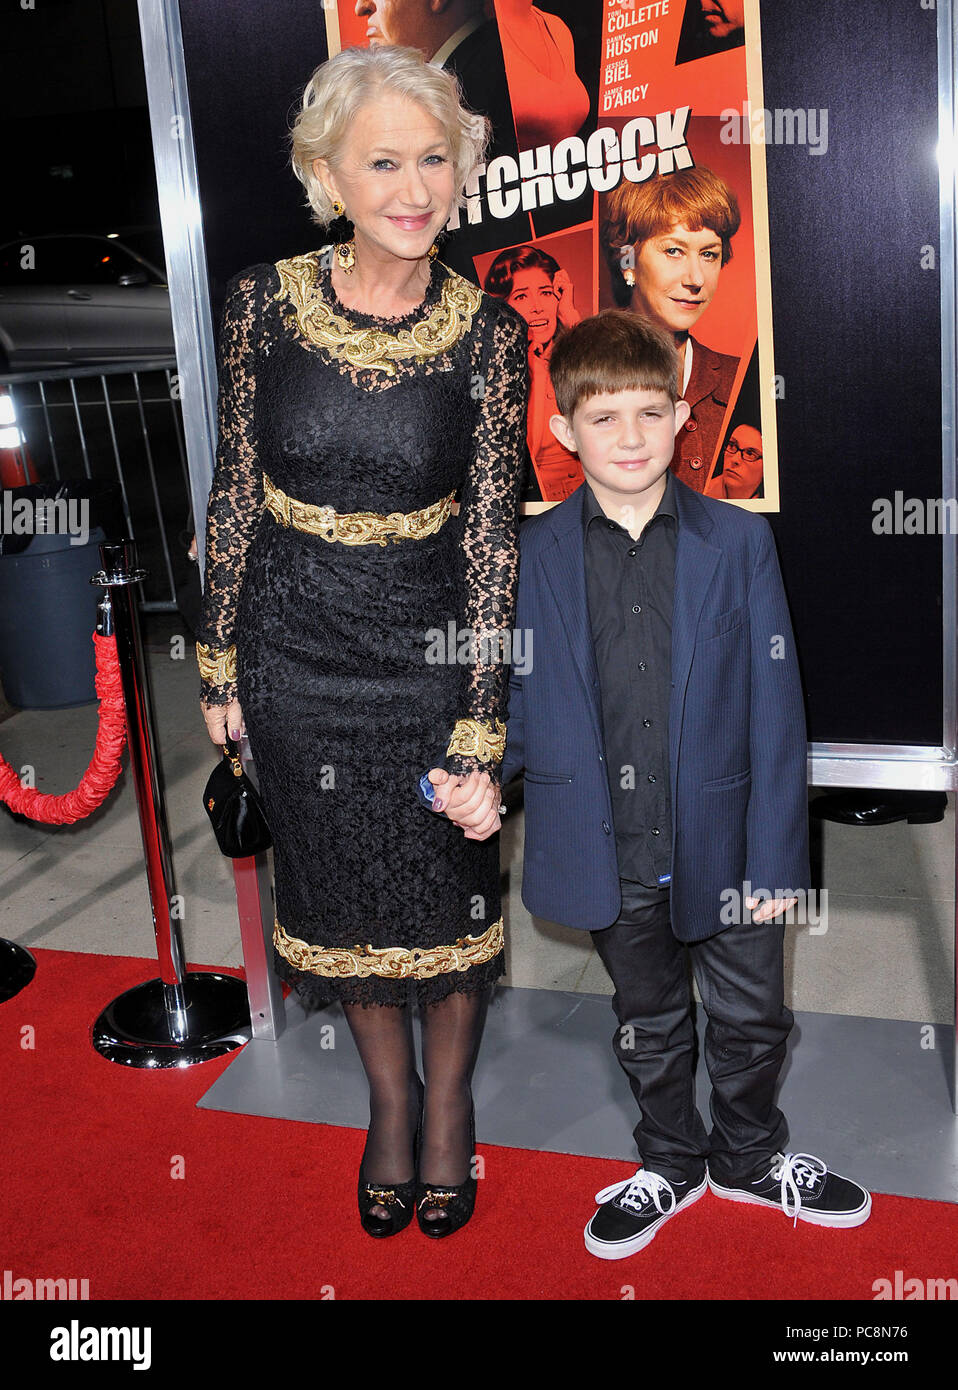 Helen Mirren and her nephew  at the Hitchcock Premiere at the Academy Of Motion Pictures in Los Angeles.Helen Mirren and her nephew  ------------- Red Carpet Event, Vertical, USA, Film Industry, Celebrities,  Photography, Bestof, Arts Culture and Entertainment, Topix Celebrities fashion /  Vertical, Best of, Event in Hollywood Life - California,  Red Carpet and backstage, USA, Film Industry, Celebrities,  movie celebrities, TV celebrities, Music celebrities, Photography, Bestof, Arts Culture and Entertainment,  Topix, vertical,  family from from the year , 2012, inquiry tsuni@Gamma-USA.com Hus Stock Photo